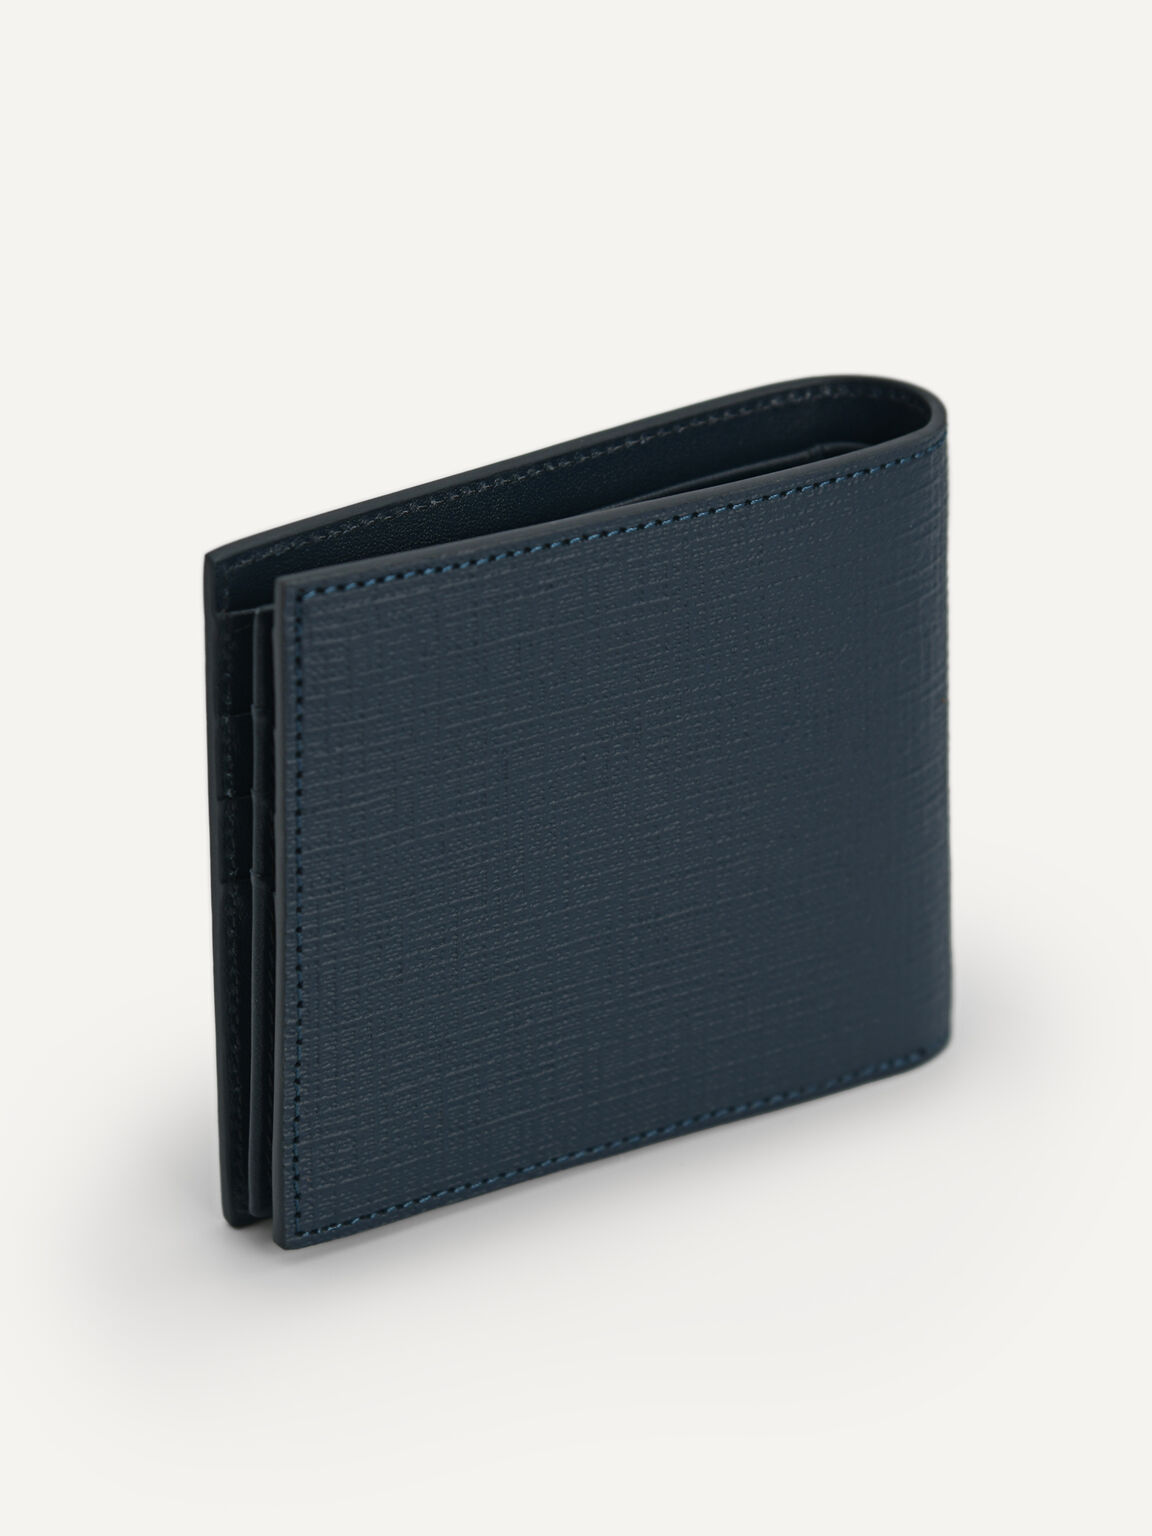 Textured Leather Wallet, Navy